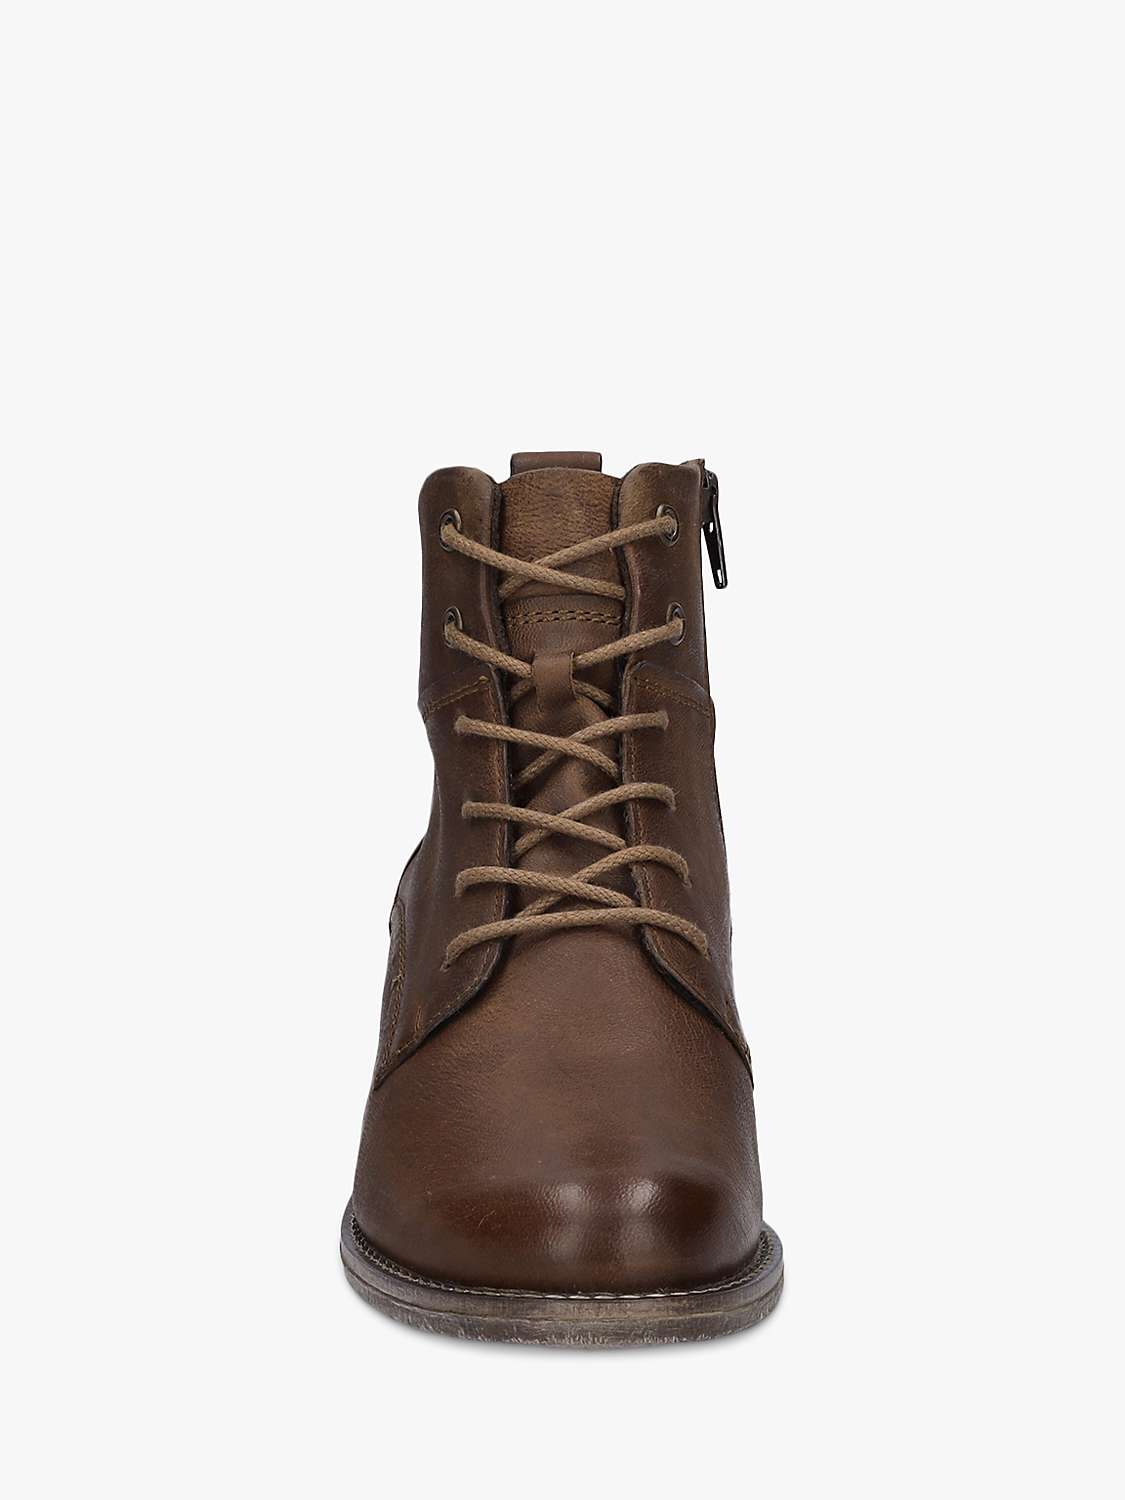 Buy Josef Seibel Sienna 95 Leather Lace Up Ankle Boots, Camel Online at johnlewis.com